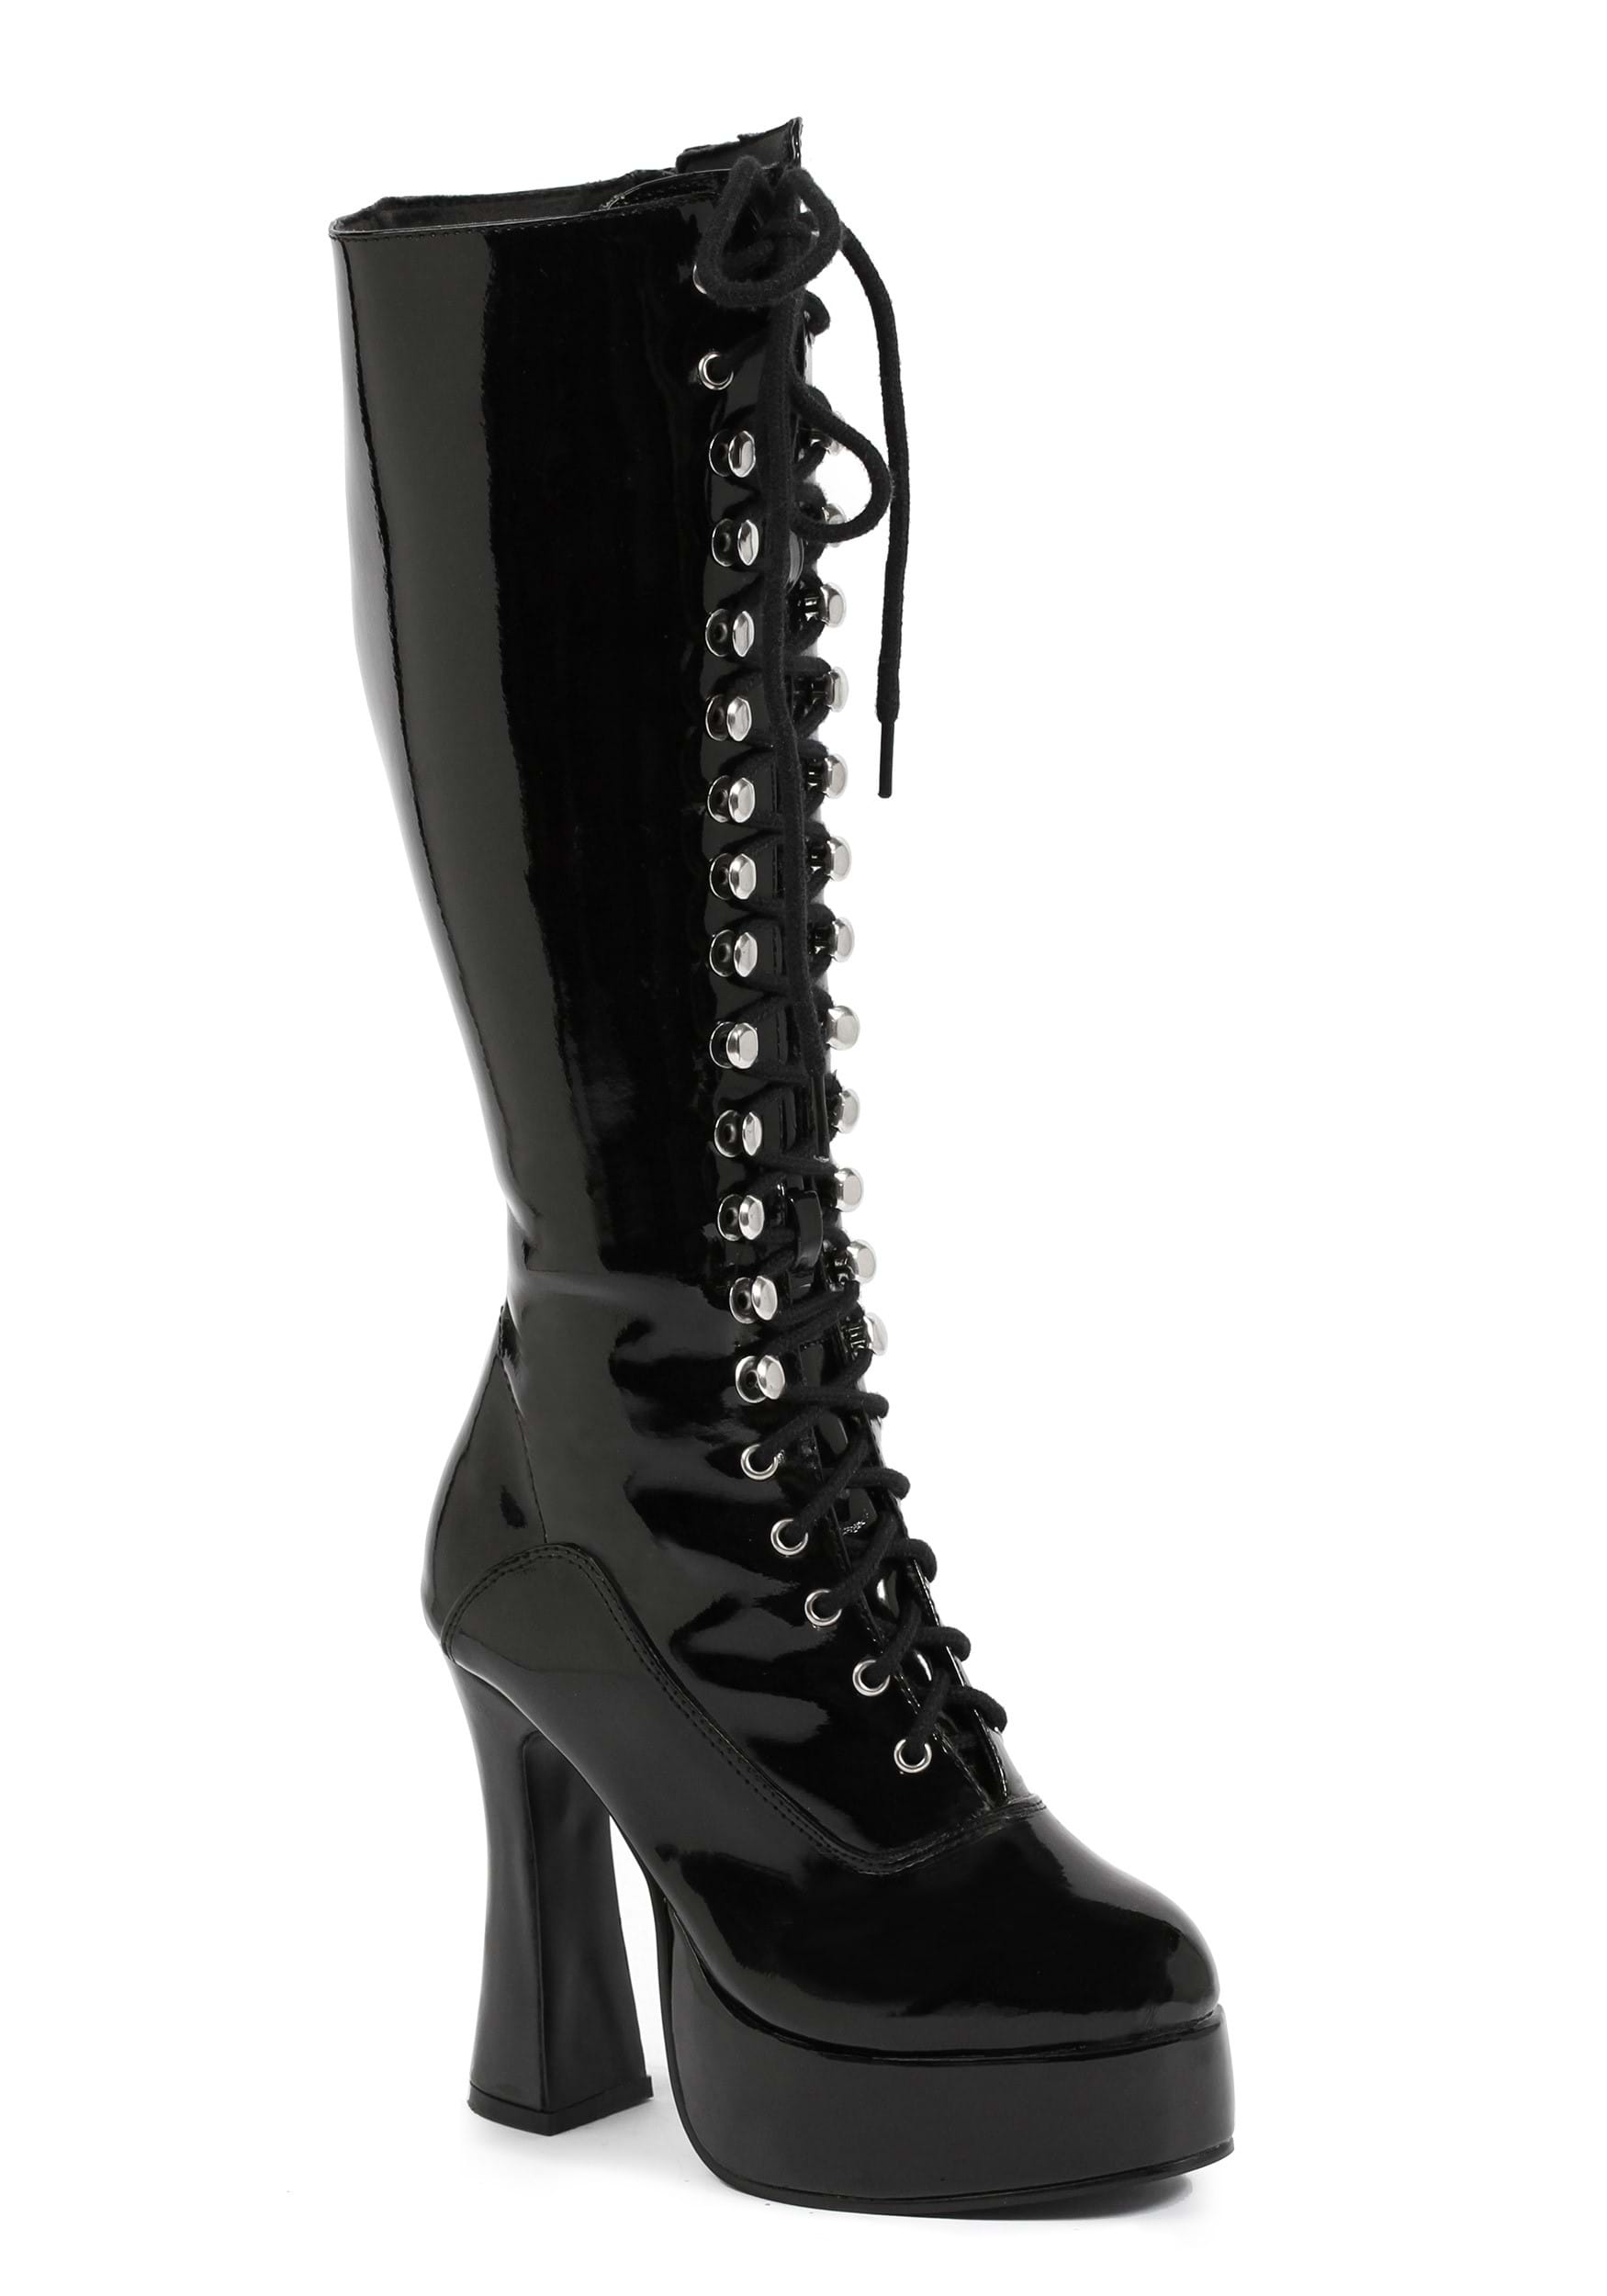 Image of Black Lace Knee High Women's Boots ID EEEASY-10